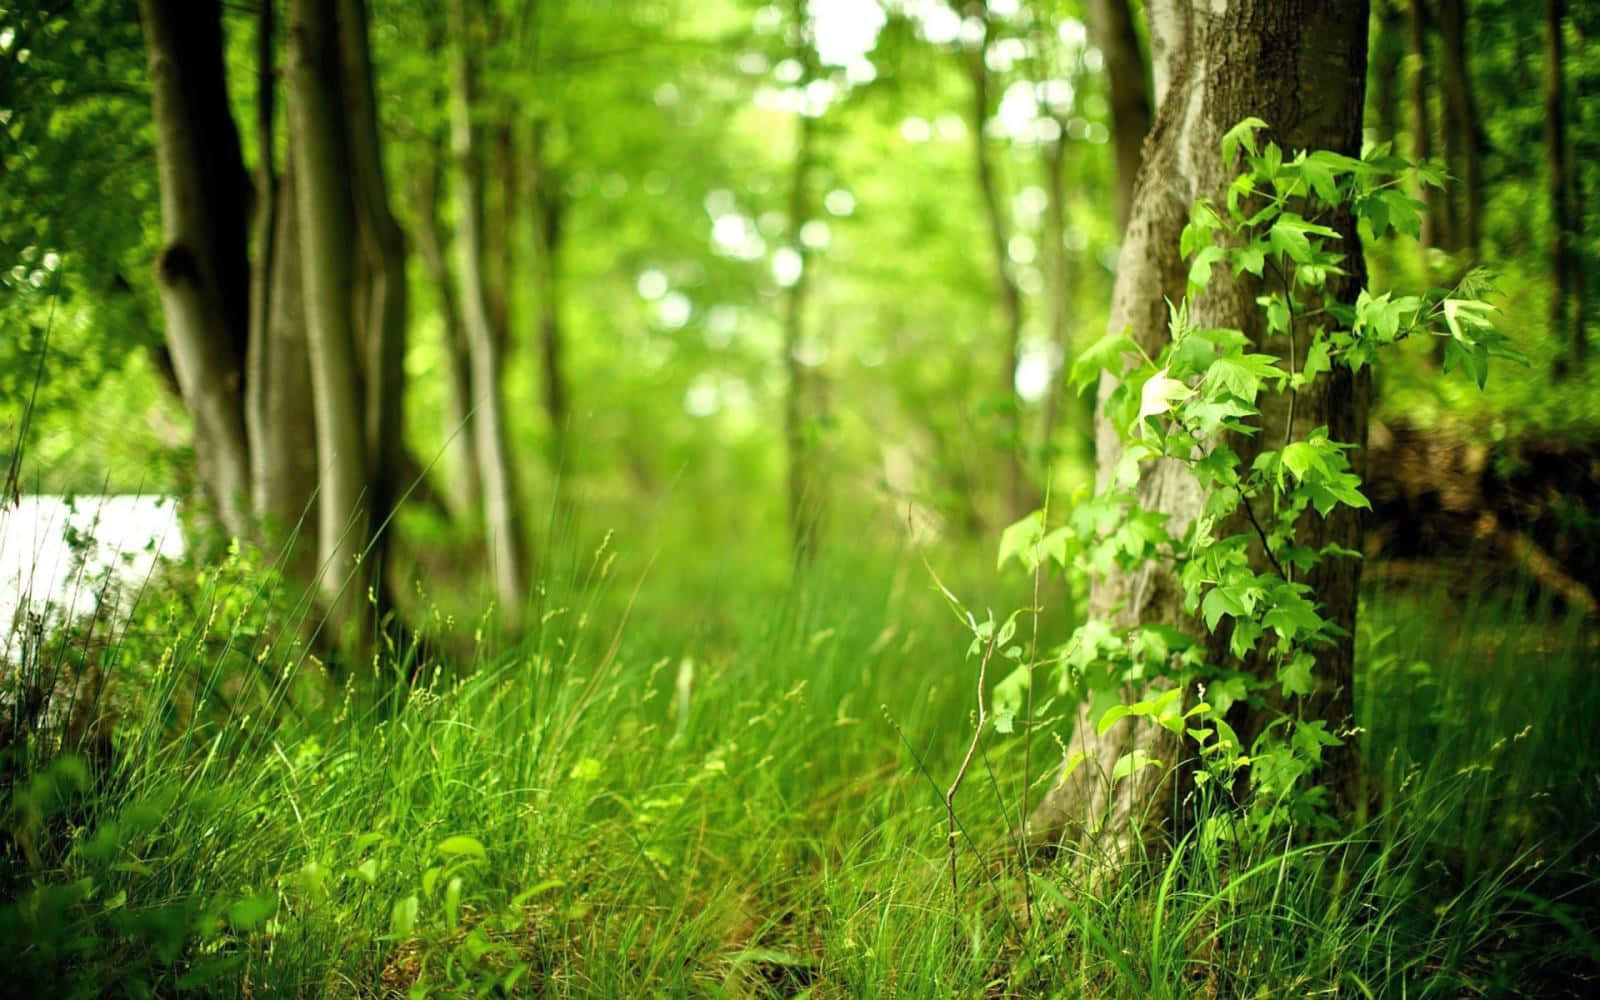 A Calm And Serene Forest In Warm And Calming Green Shades